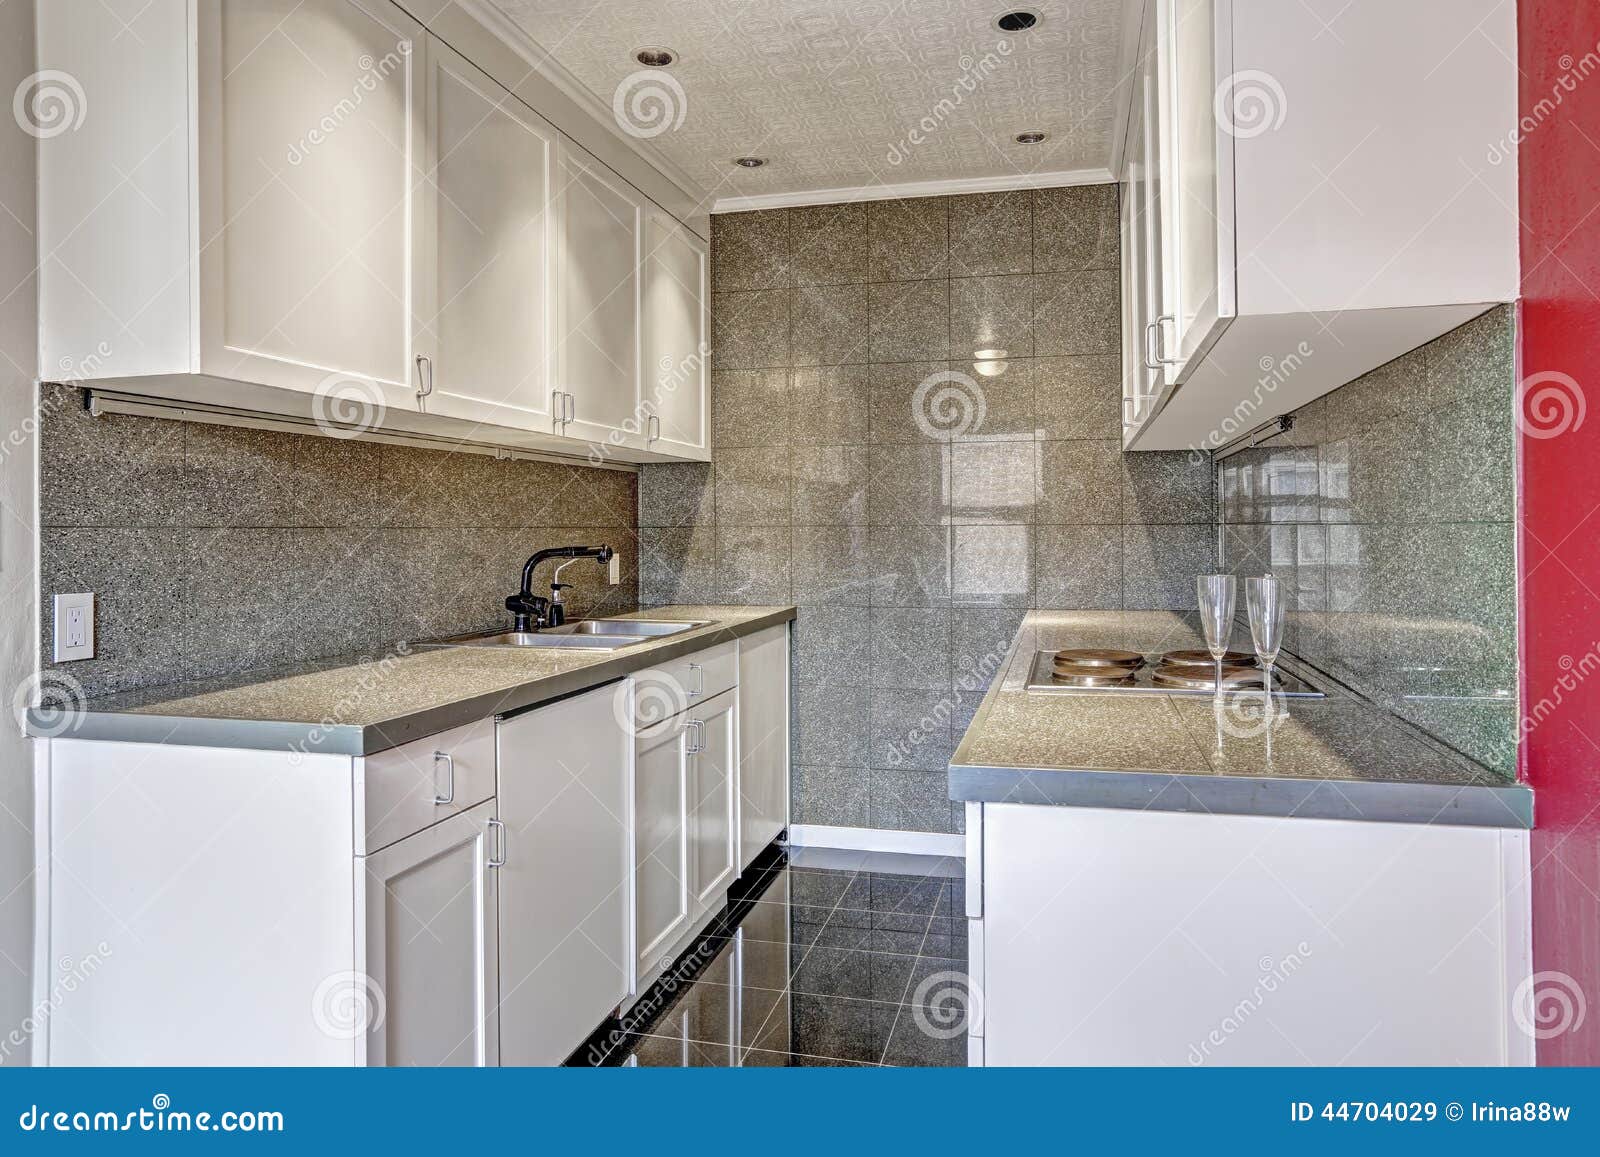 Modern Kitchen With Tile Trim Stock Image Image Of Kitchen